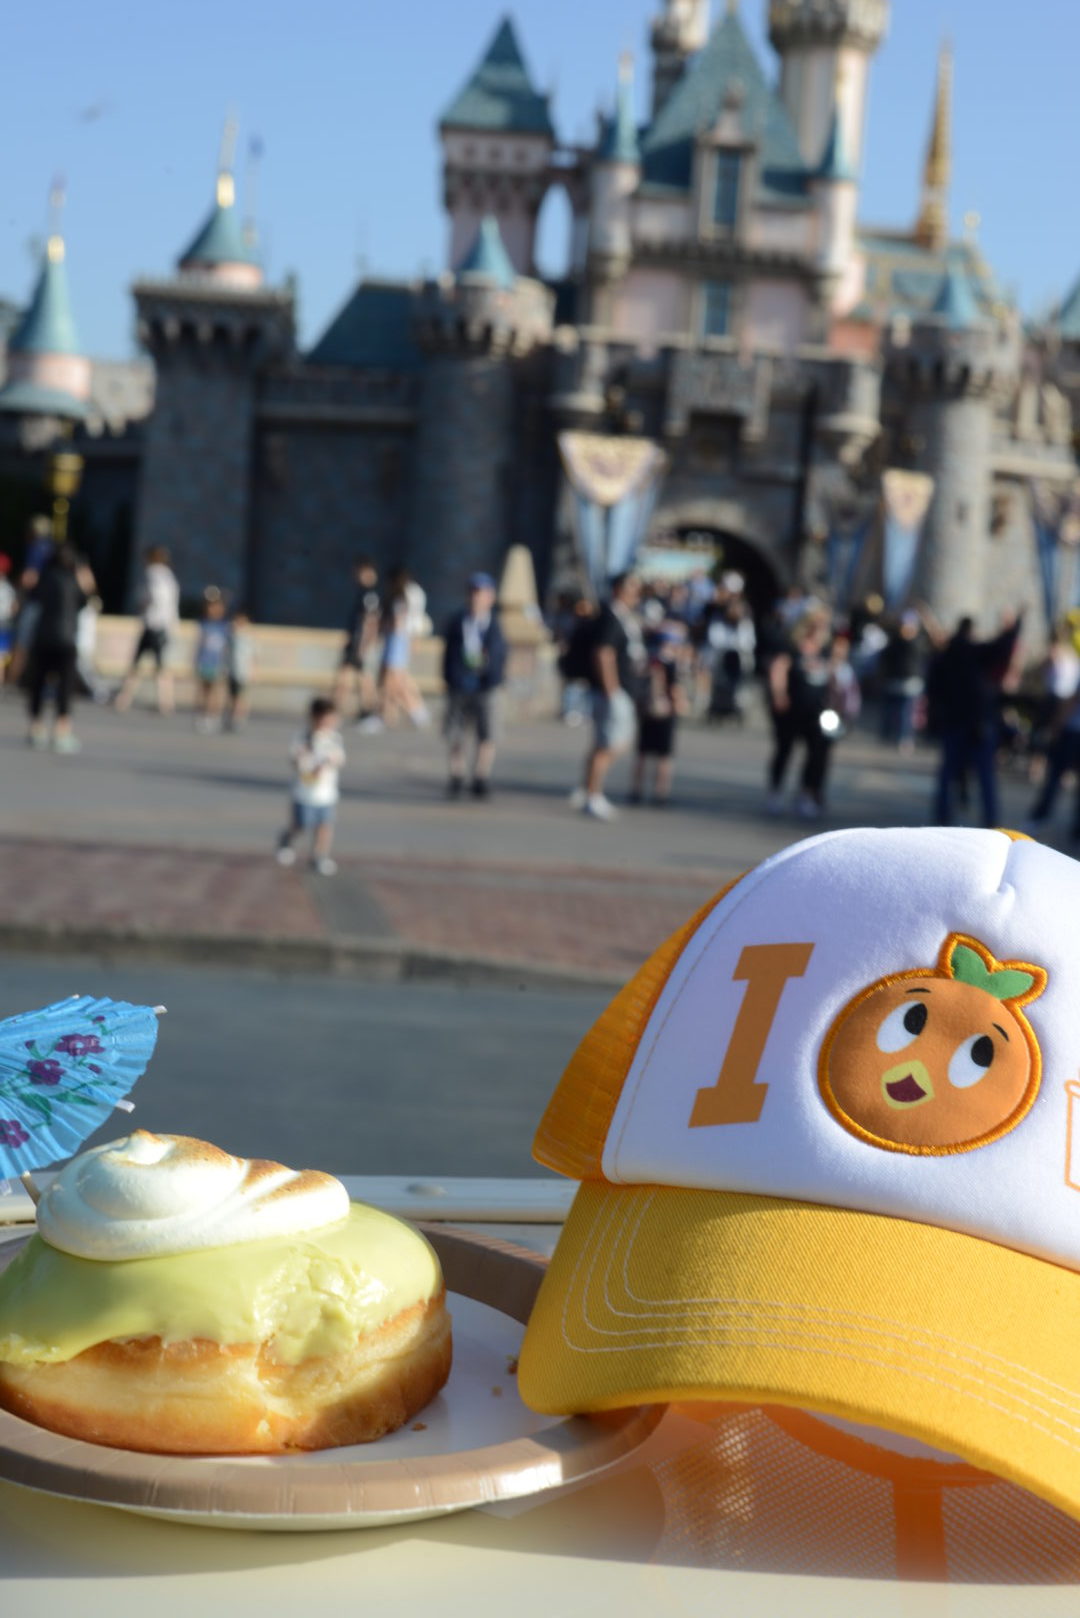 Dole Whip Donut from the Cappuccino Cart in front of Sleeping Beauty Castle | Where to Find Good Coffee at Disneyland